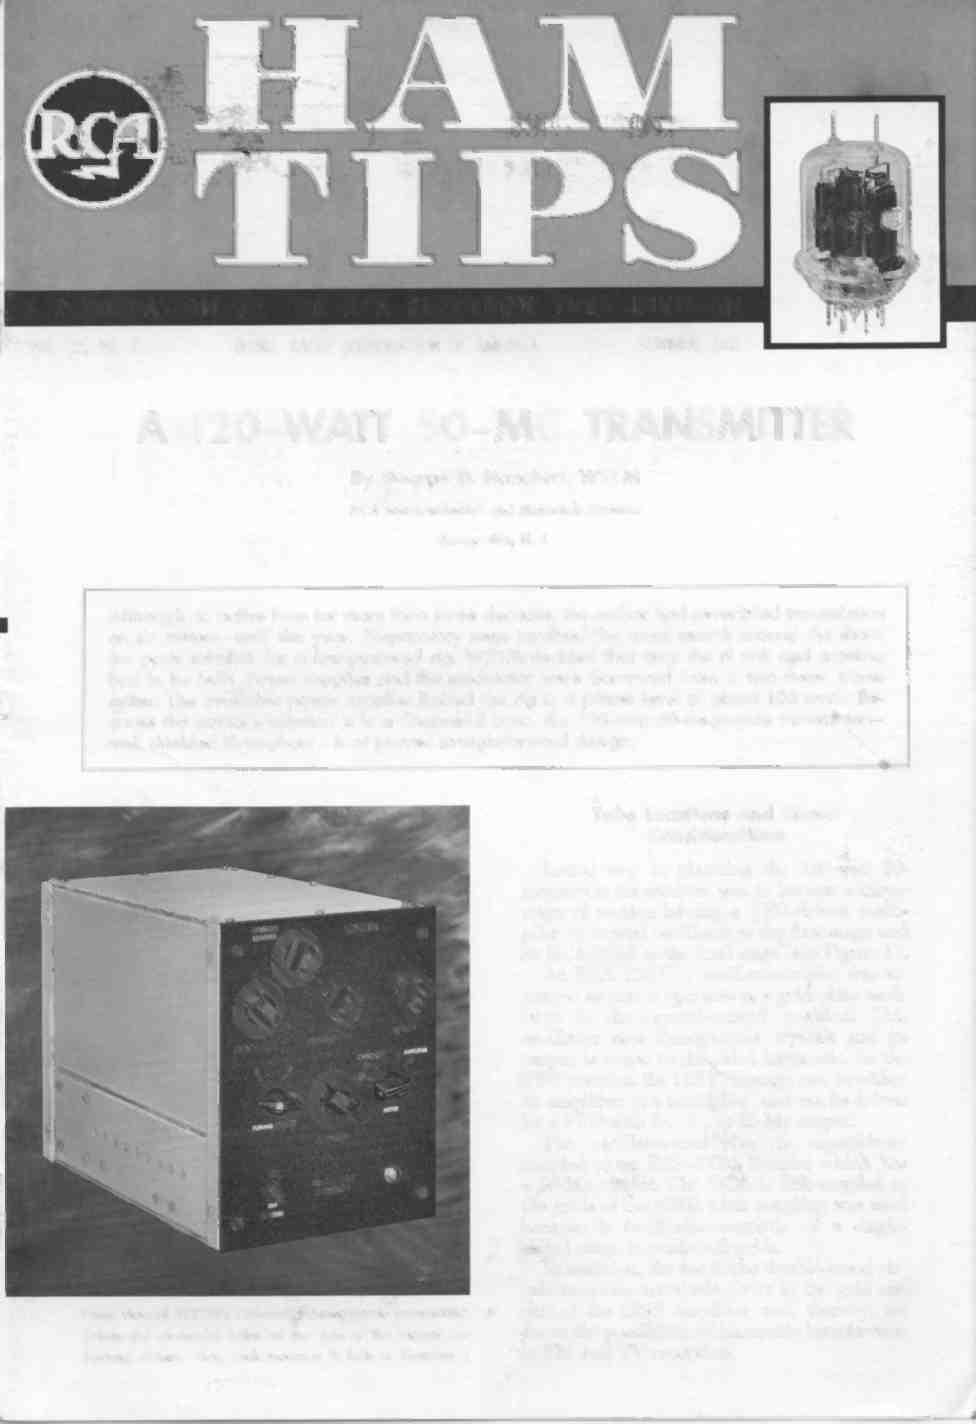 --- -4+, )1\ 1,\ r JL A PUBLICATION OF THE RCA ELECTRON TUBE DIVISION VOL. 22, NO. 2 1962, RADIO CORPORATION OF AMERICA SUMMER, 1962 A 120 -WATT 50 -MC TRANSMITTER By George D.